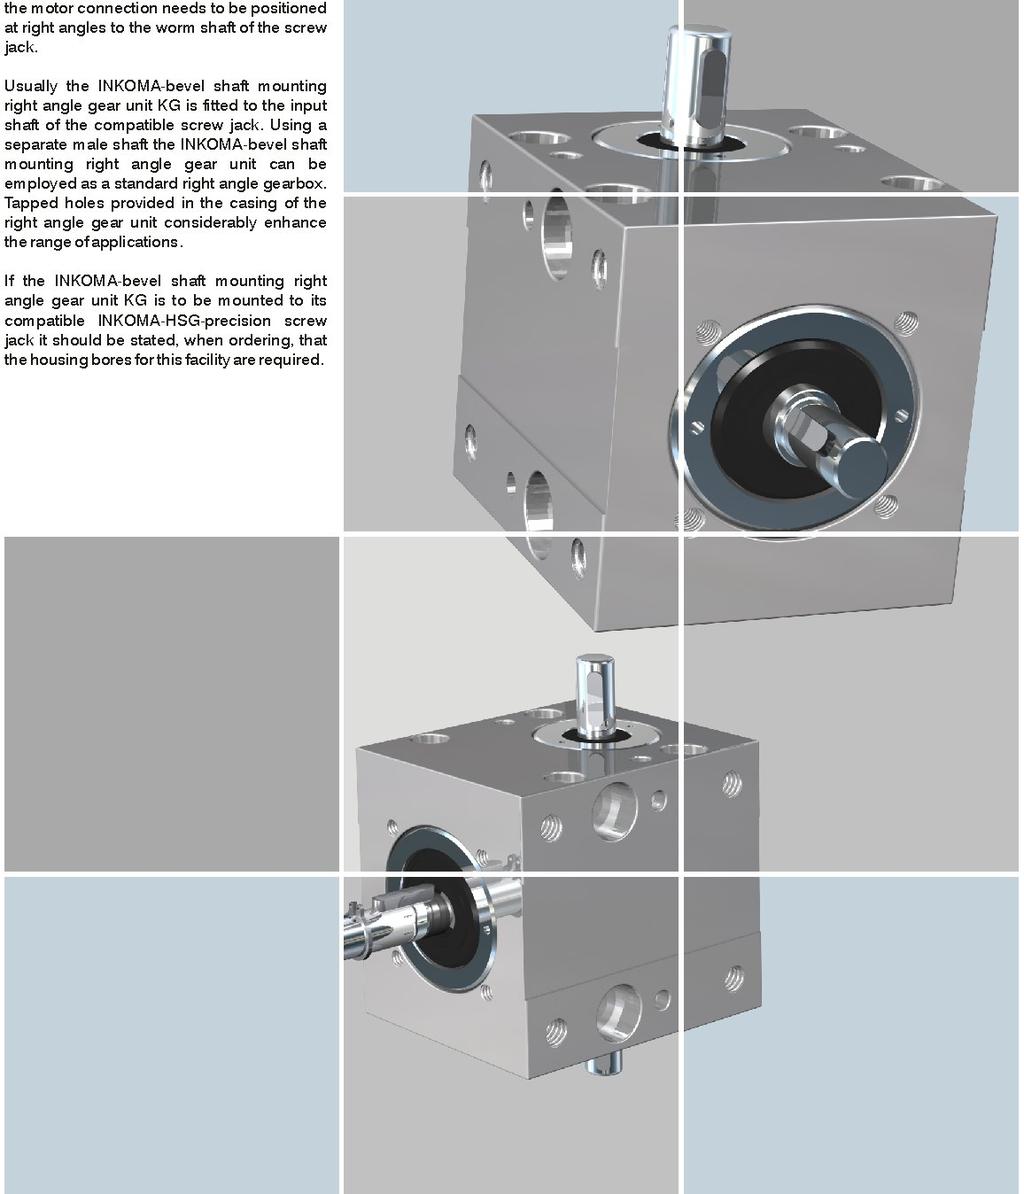 Using a separate male shaft the -bevel shaft mounting right angle gear unit can be employed as a standard right angle gearbox.